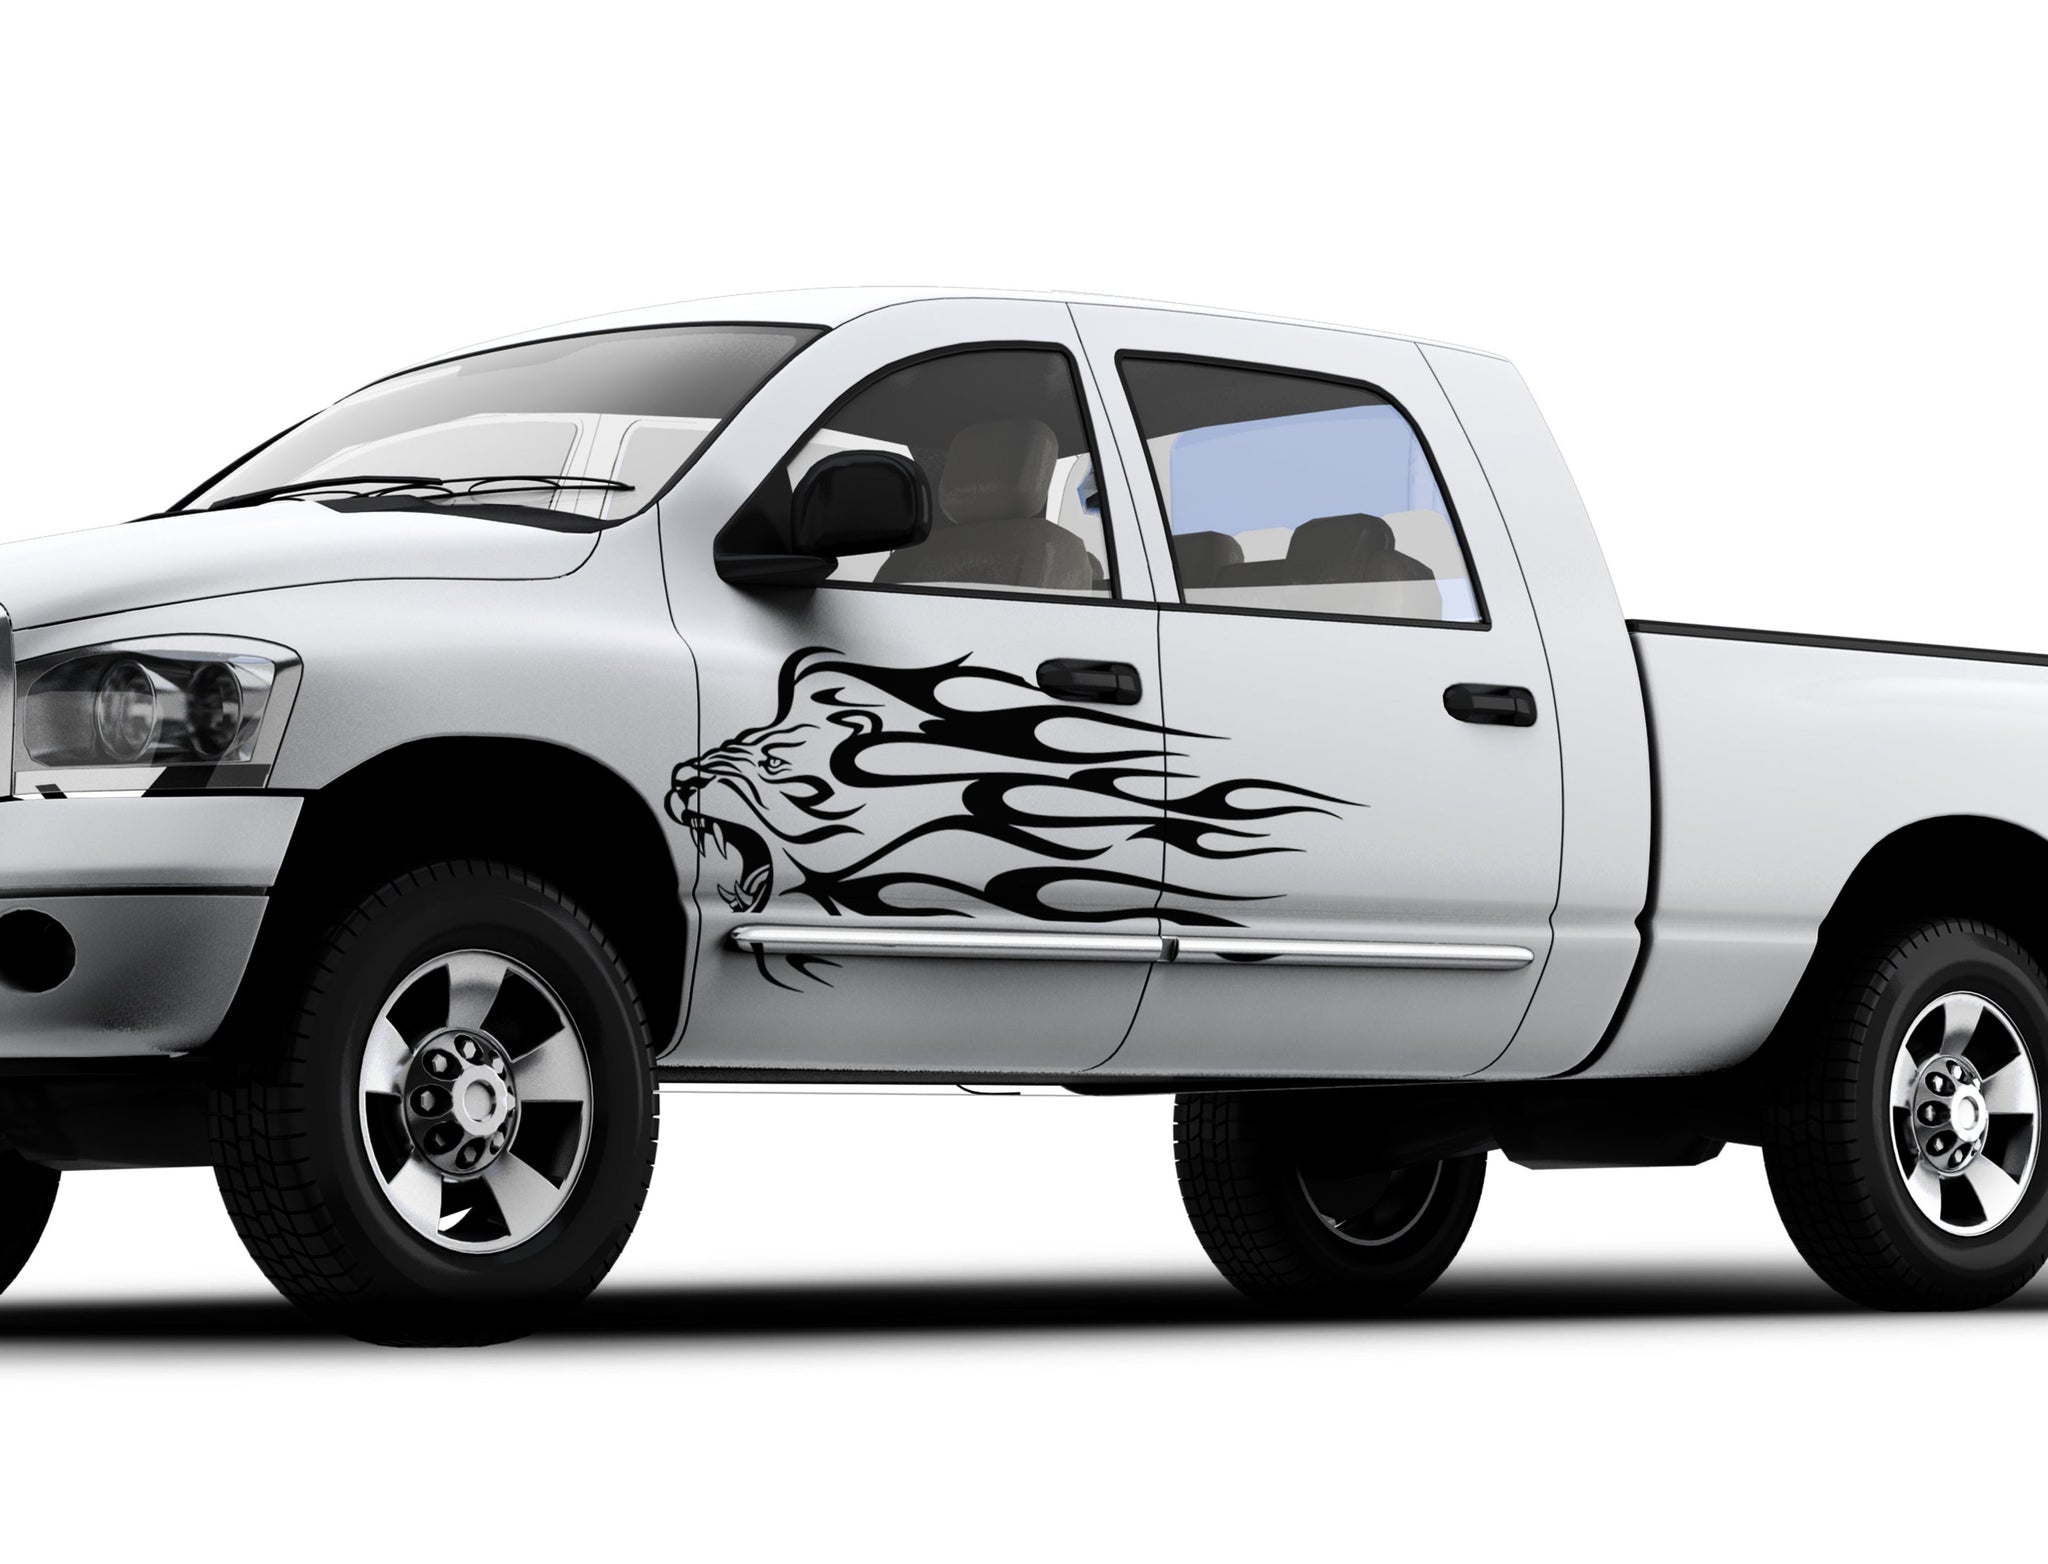 Lion flames vinyl decals for cars and trucks